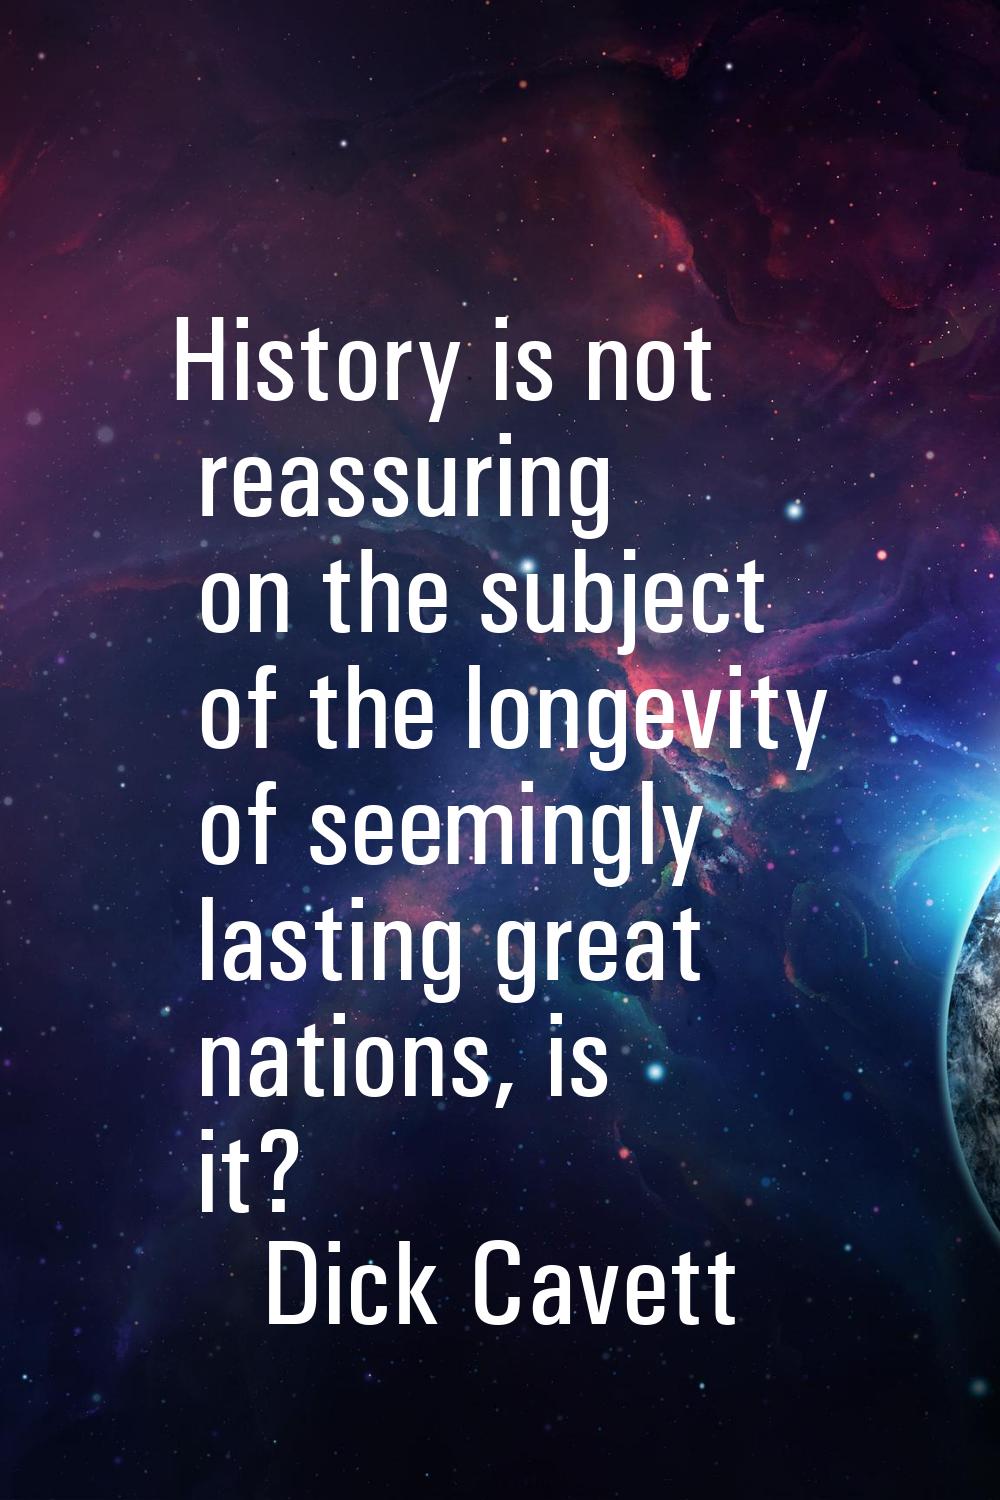 History is not reassuring on the subject of the longevity of seemingly lasting great nations, is it